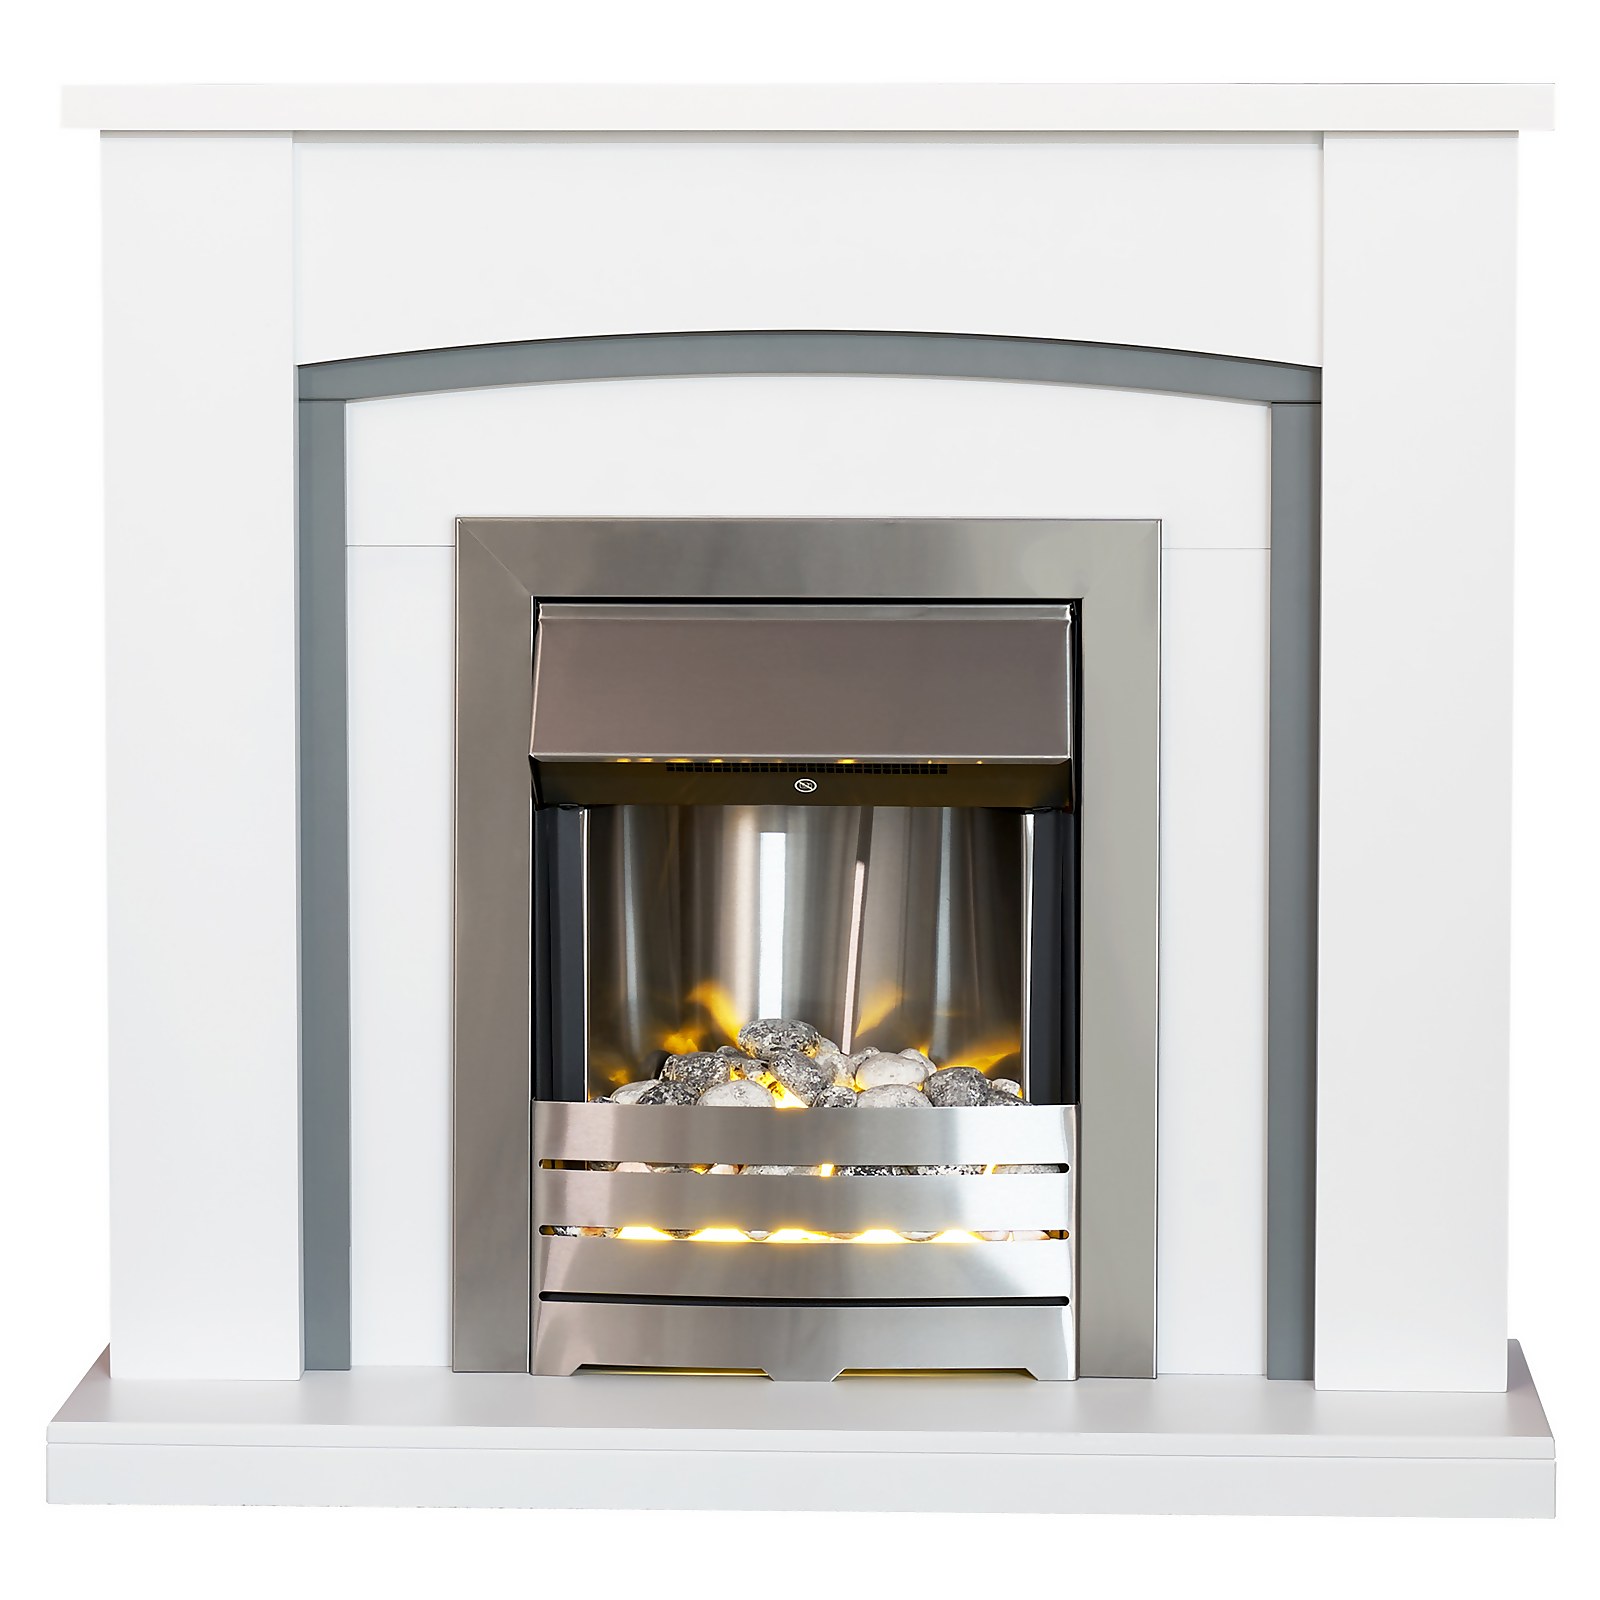 Adam Chilton Fireplace Surround & Helios Electric Fire with Flat to Wall Fitting - White, Grey & Brushed Steel